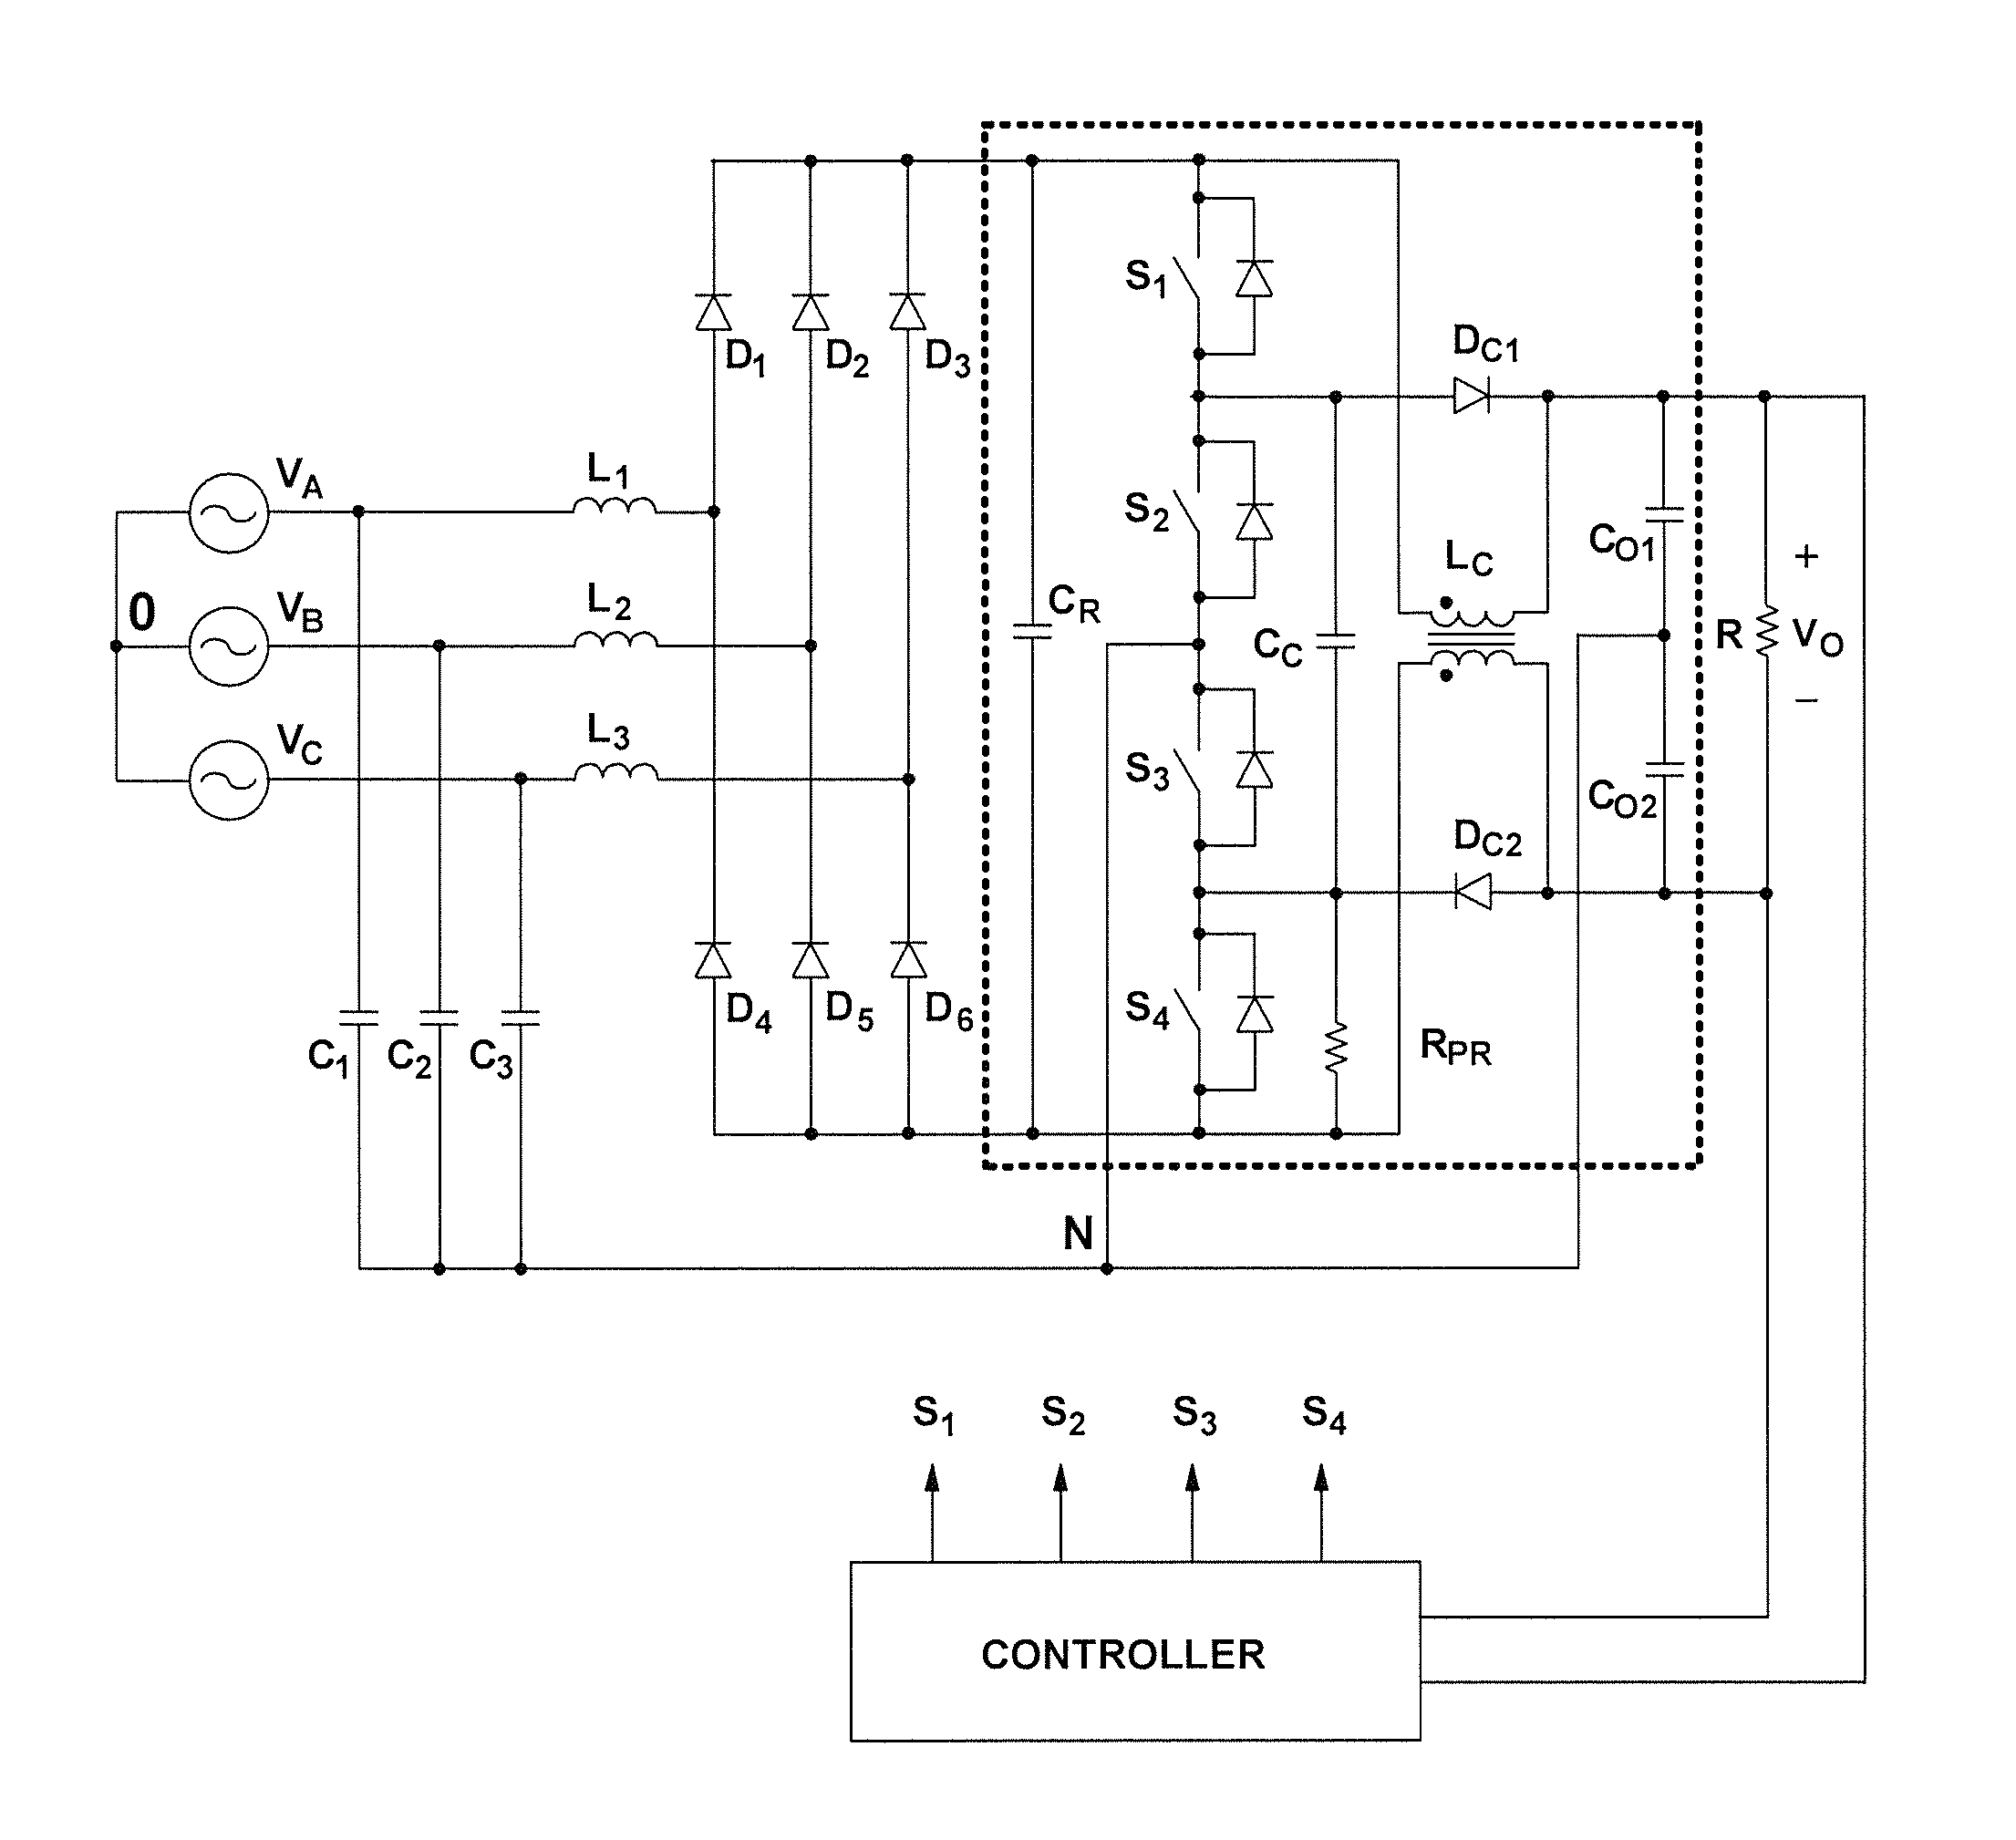 Three-phase three-level soft-switched pfc rectifiers